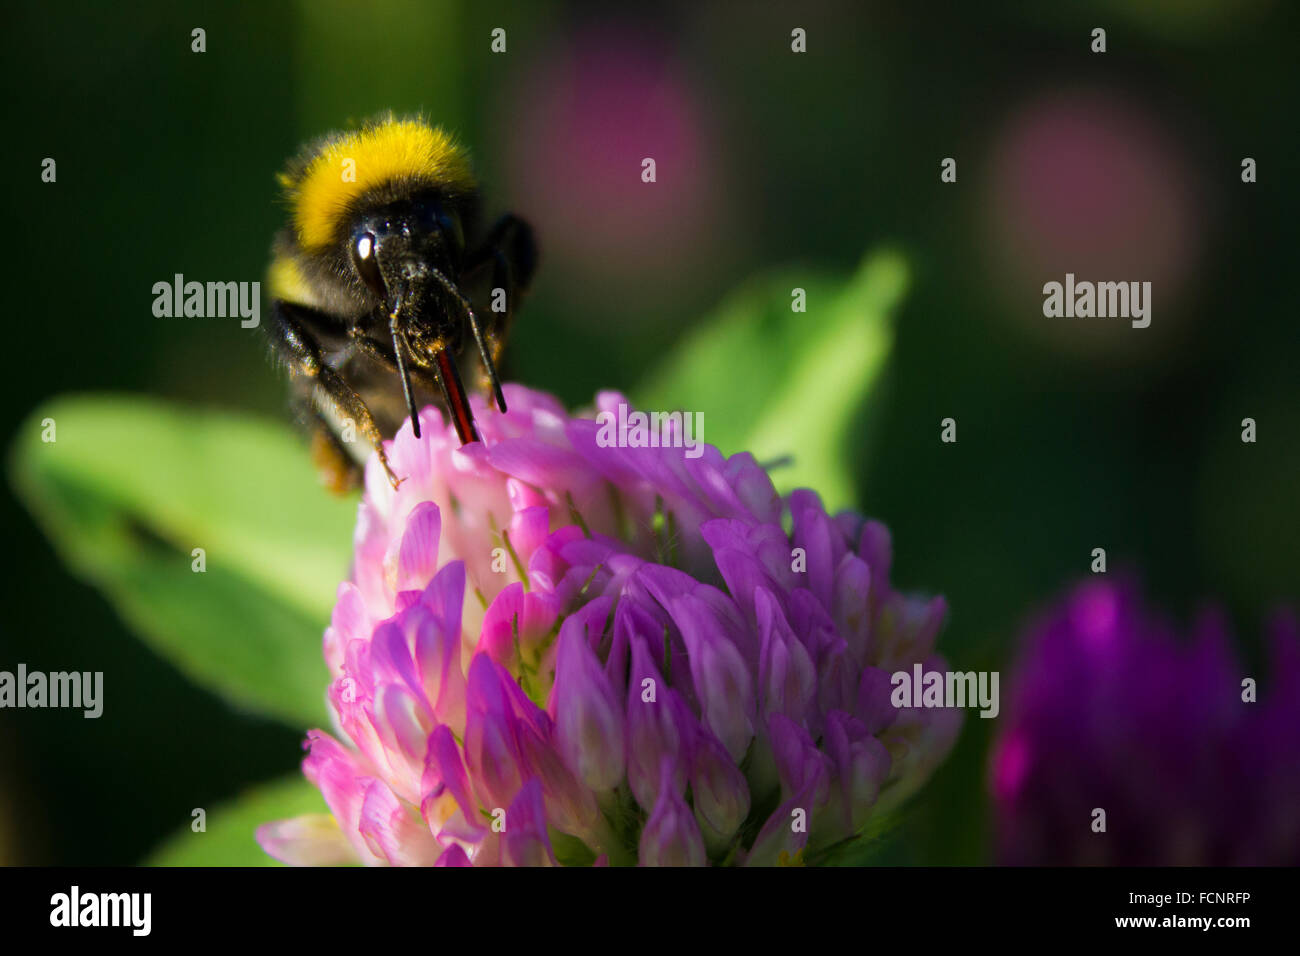 A bumblebee sucking nectar out of a flower Stock Photo